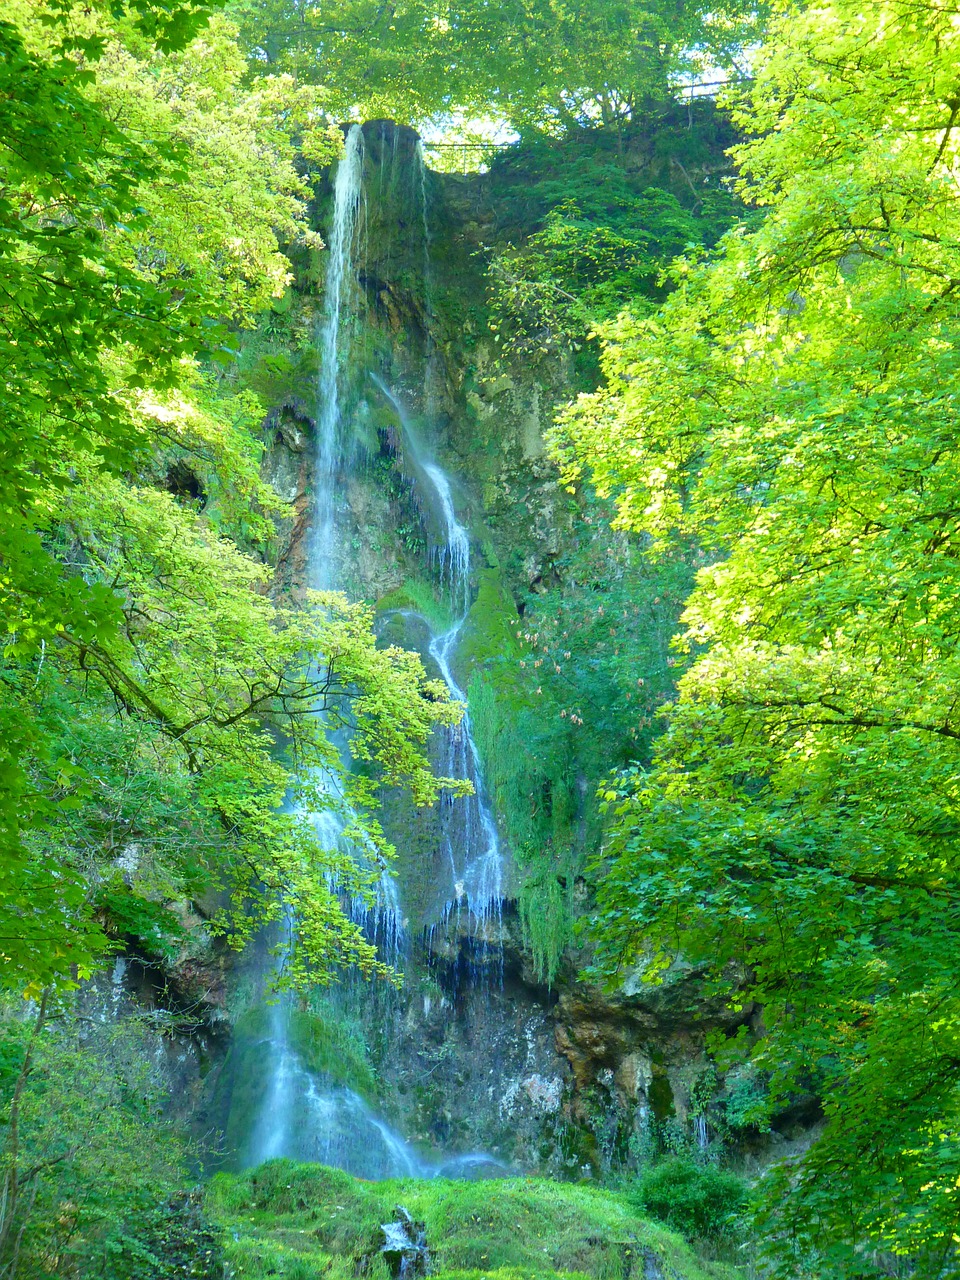 waterfall,urach waterfall,water,forest,urach,trees,green,swabian alb,alb,alb eaves,free pictures, free photos, free images, royalty free, free illustrations, public domain